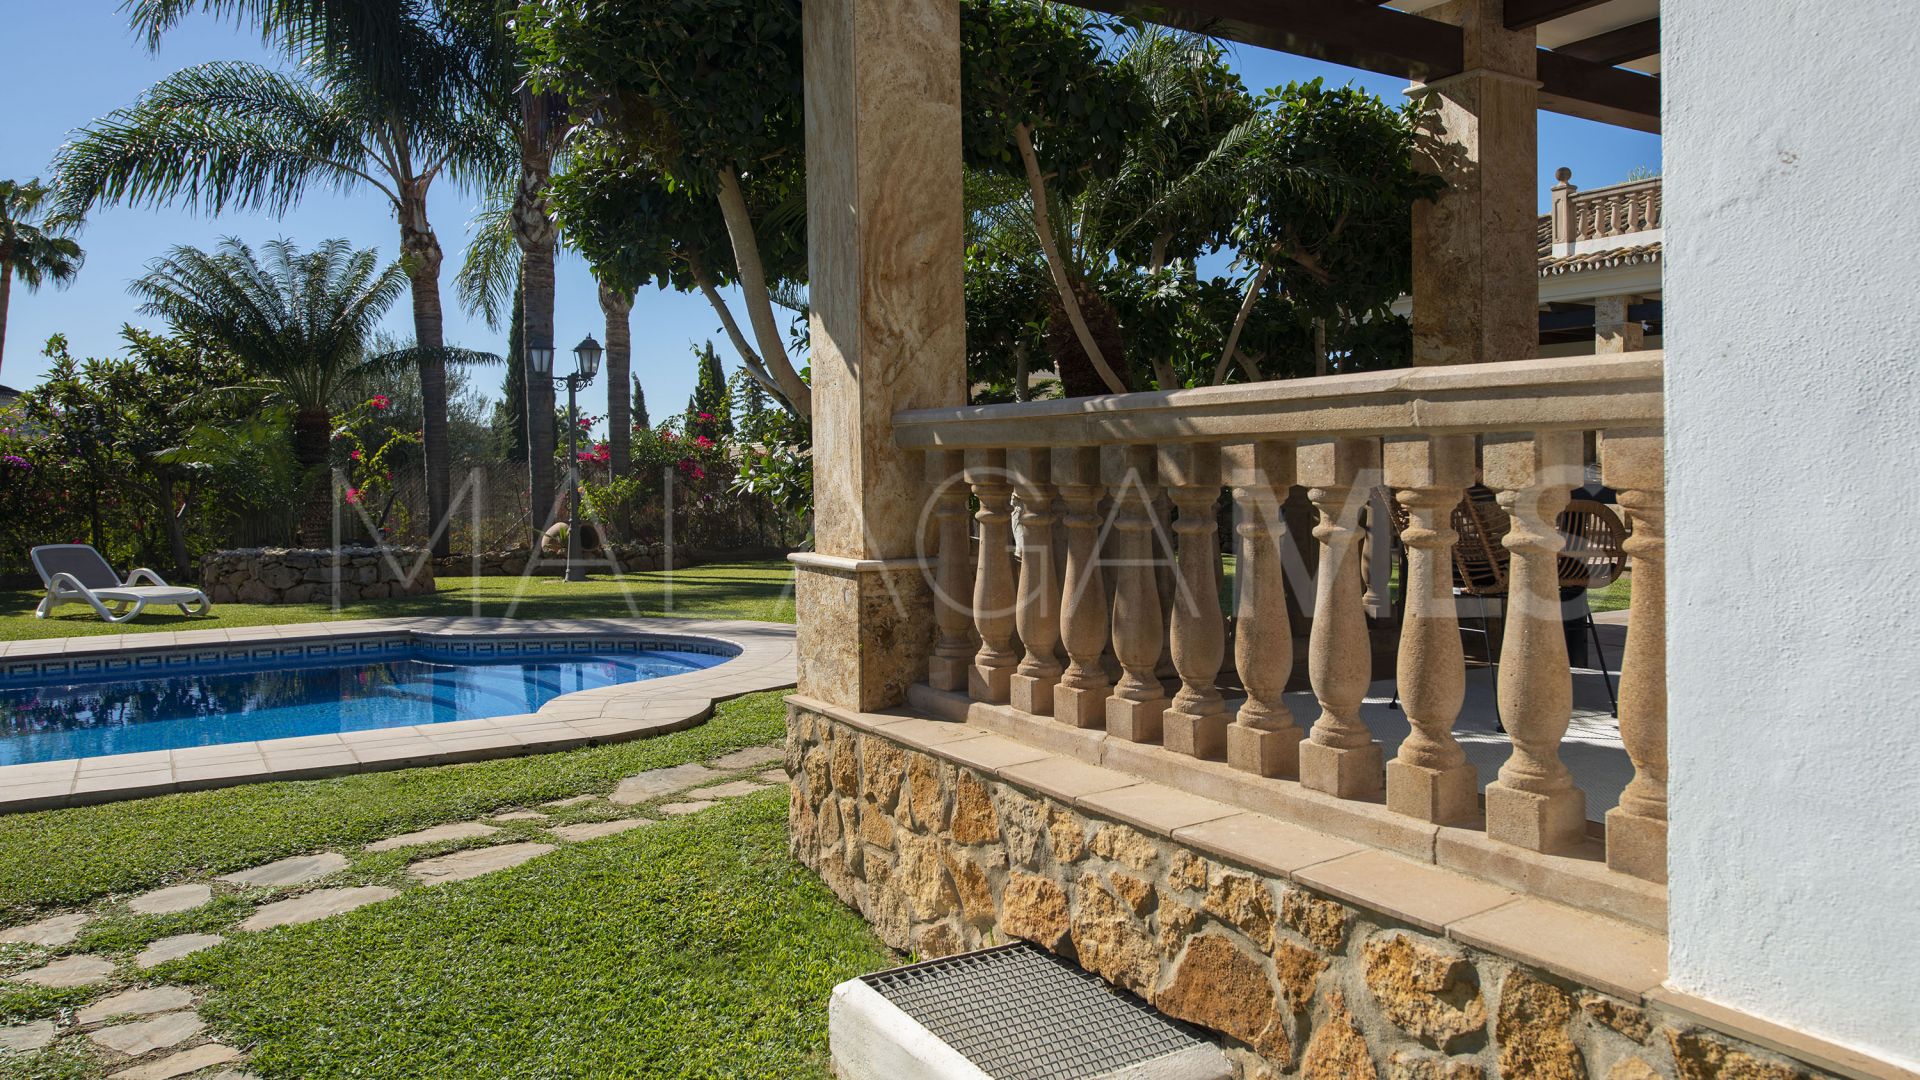 For sale villa in Mijas Golf with 5 bedrooms